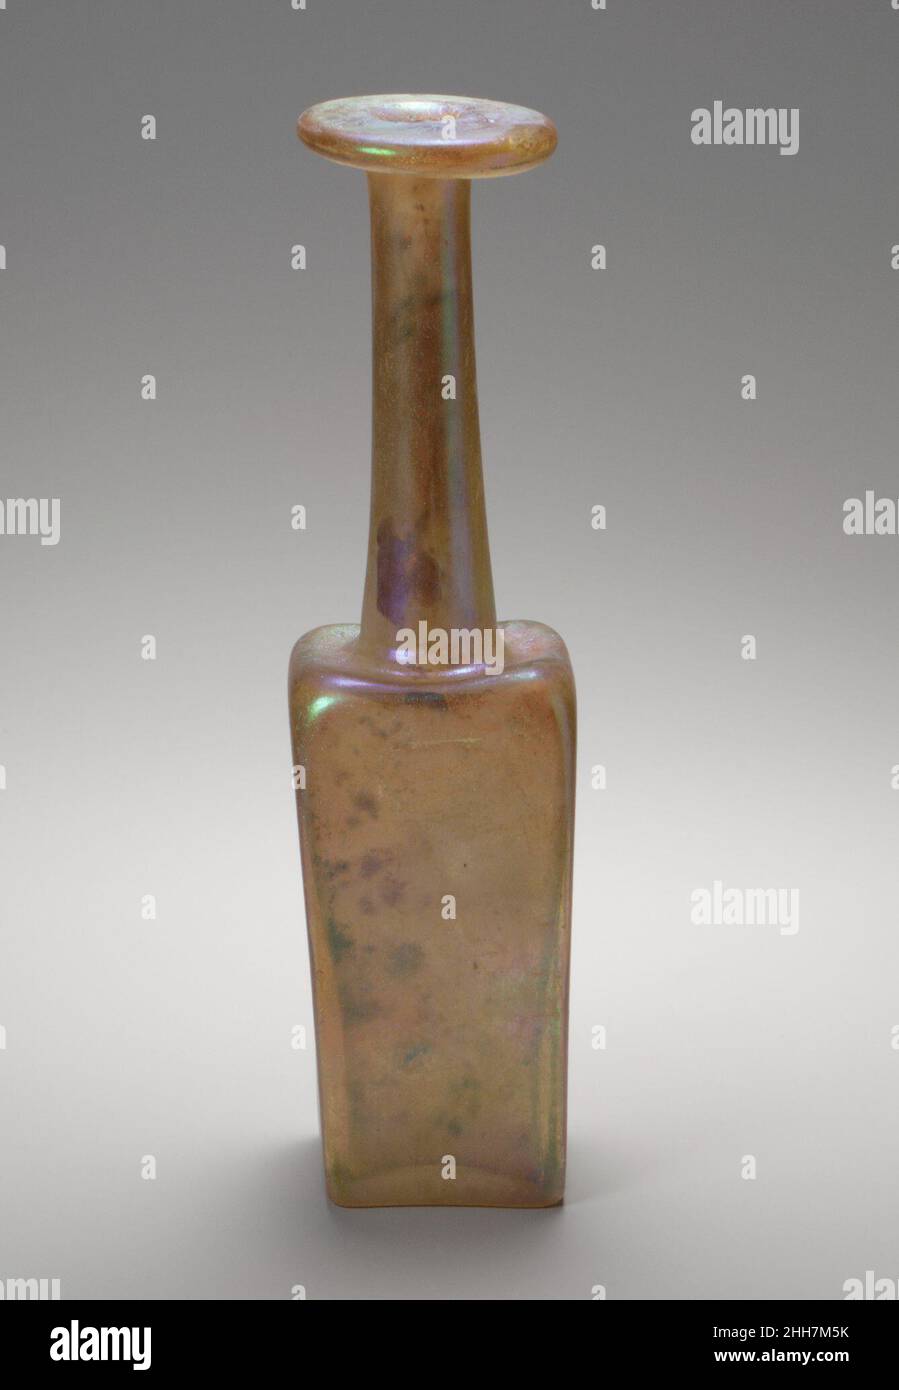 Glass 'Mercury' bottle 3rd century A.D. Roman Colorless with pale yellow green tinge.Broad rim, folded out, down, round and in, and flattened on top surface; thick-walled cylindrical neck, expanding downwards; pushed-in horizontal shoulder with raised rounded corners; square, thick-walled body, with flat sides; concave bottom.In relief on bottom, standing peacock, facing right, with crest above head and tail feathers displayed behind in a stylized fashion with two circular rows of dots.Intact; dulling, pitting, and brilliant iridescence covering almost all of surfaces.Bottles of this type are Stock Photo